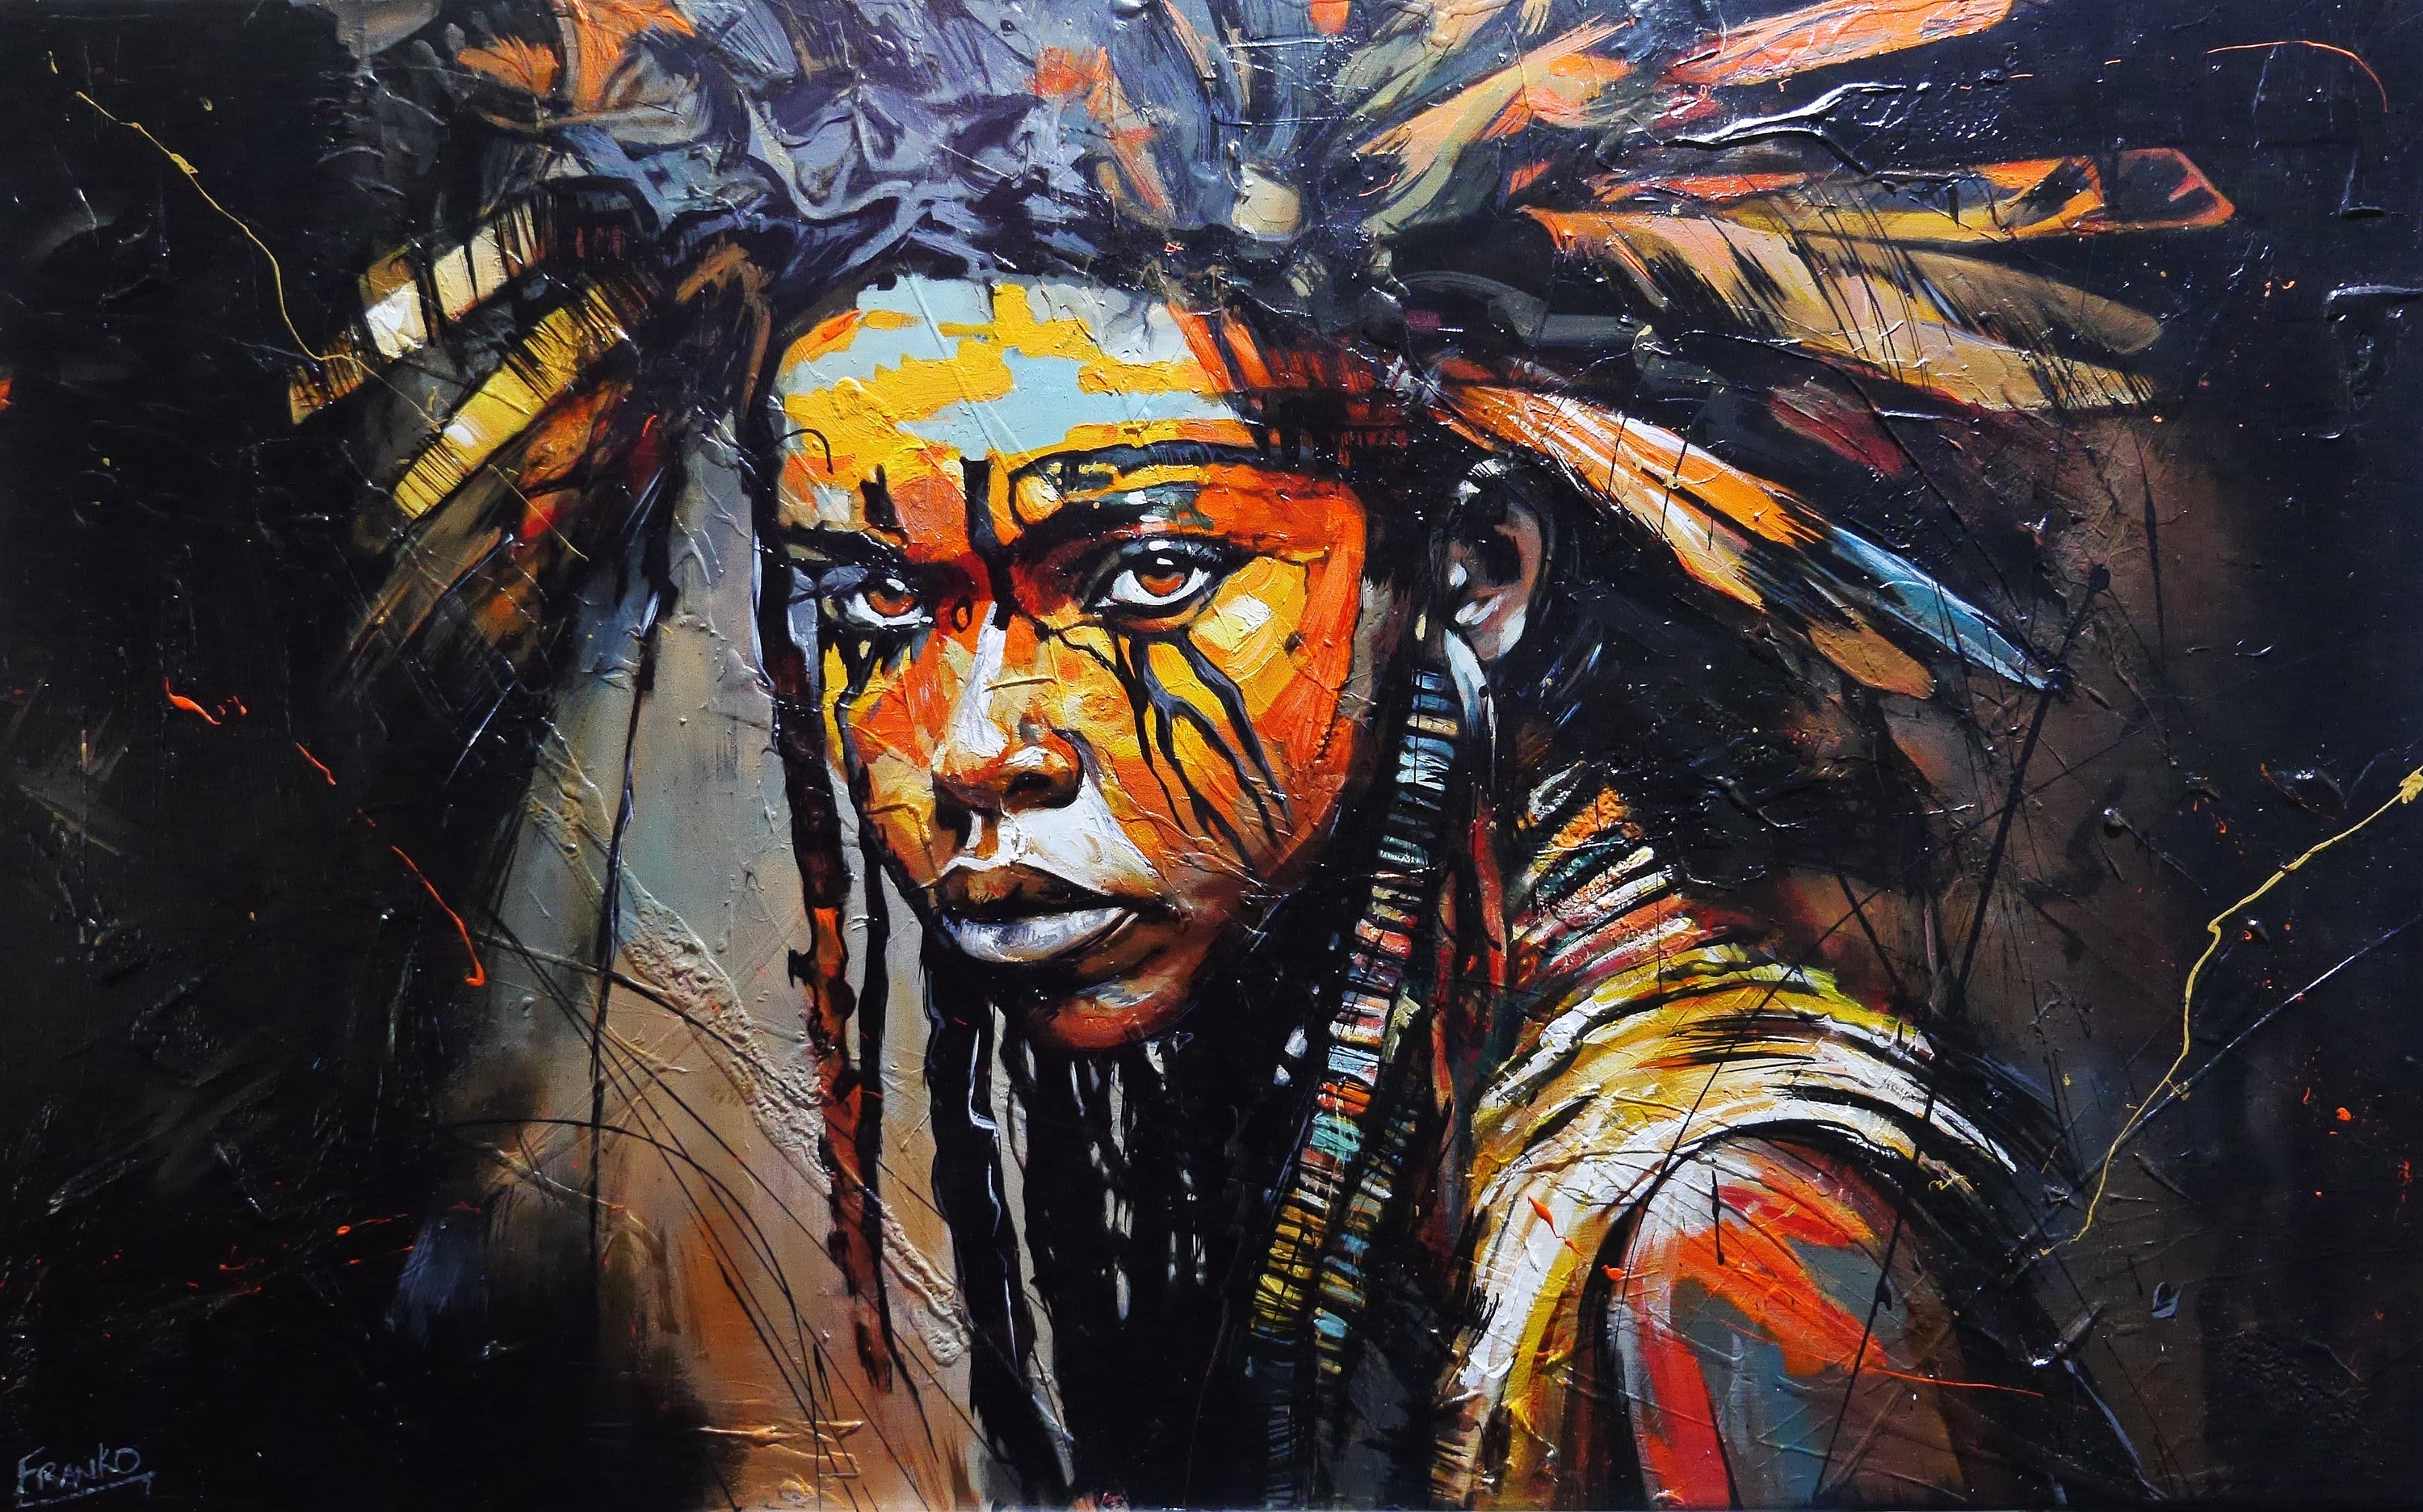 Ochre Warrior 160cm x 100cm Brave and Beautiful Abstract Framed Textured Painting